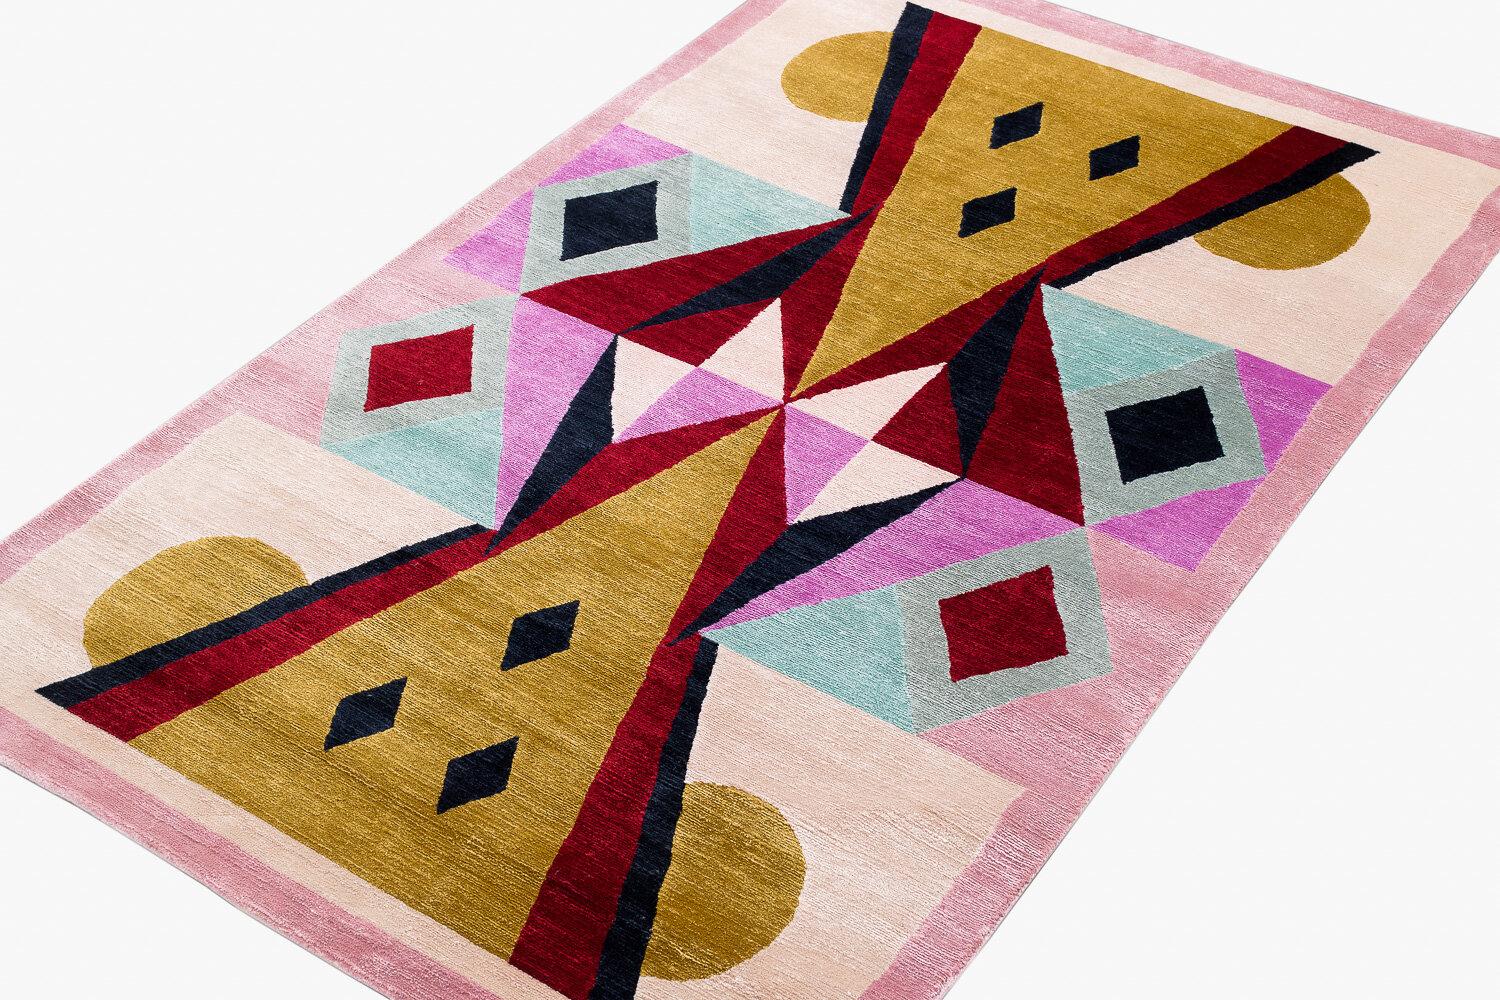 The beautiful Toto is one of four designs in our limited edition 'Earthquake collection' in a collaboration between Alessandro Mendini and Joseph Carini. These special limited edition carpets were woven by a select team of female weavers who trained